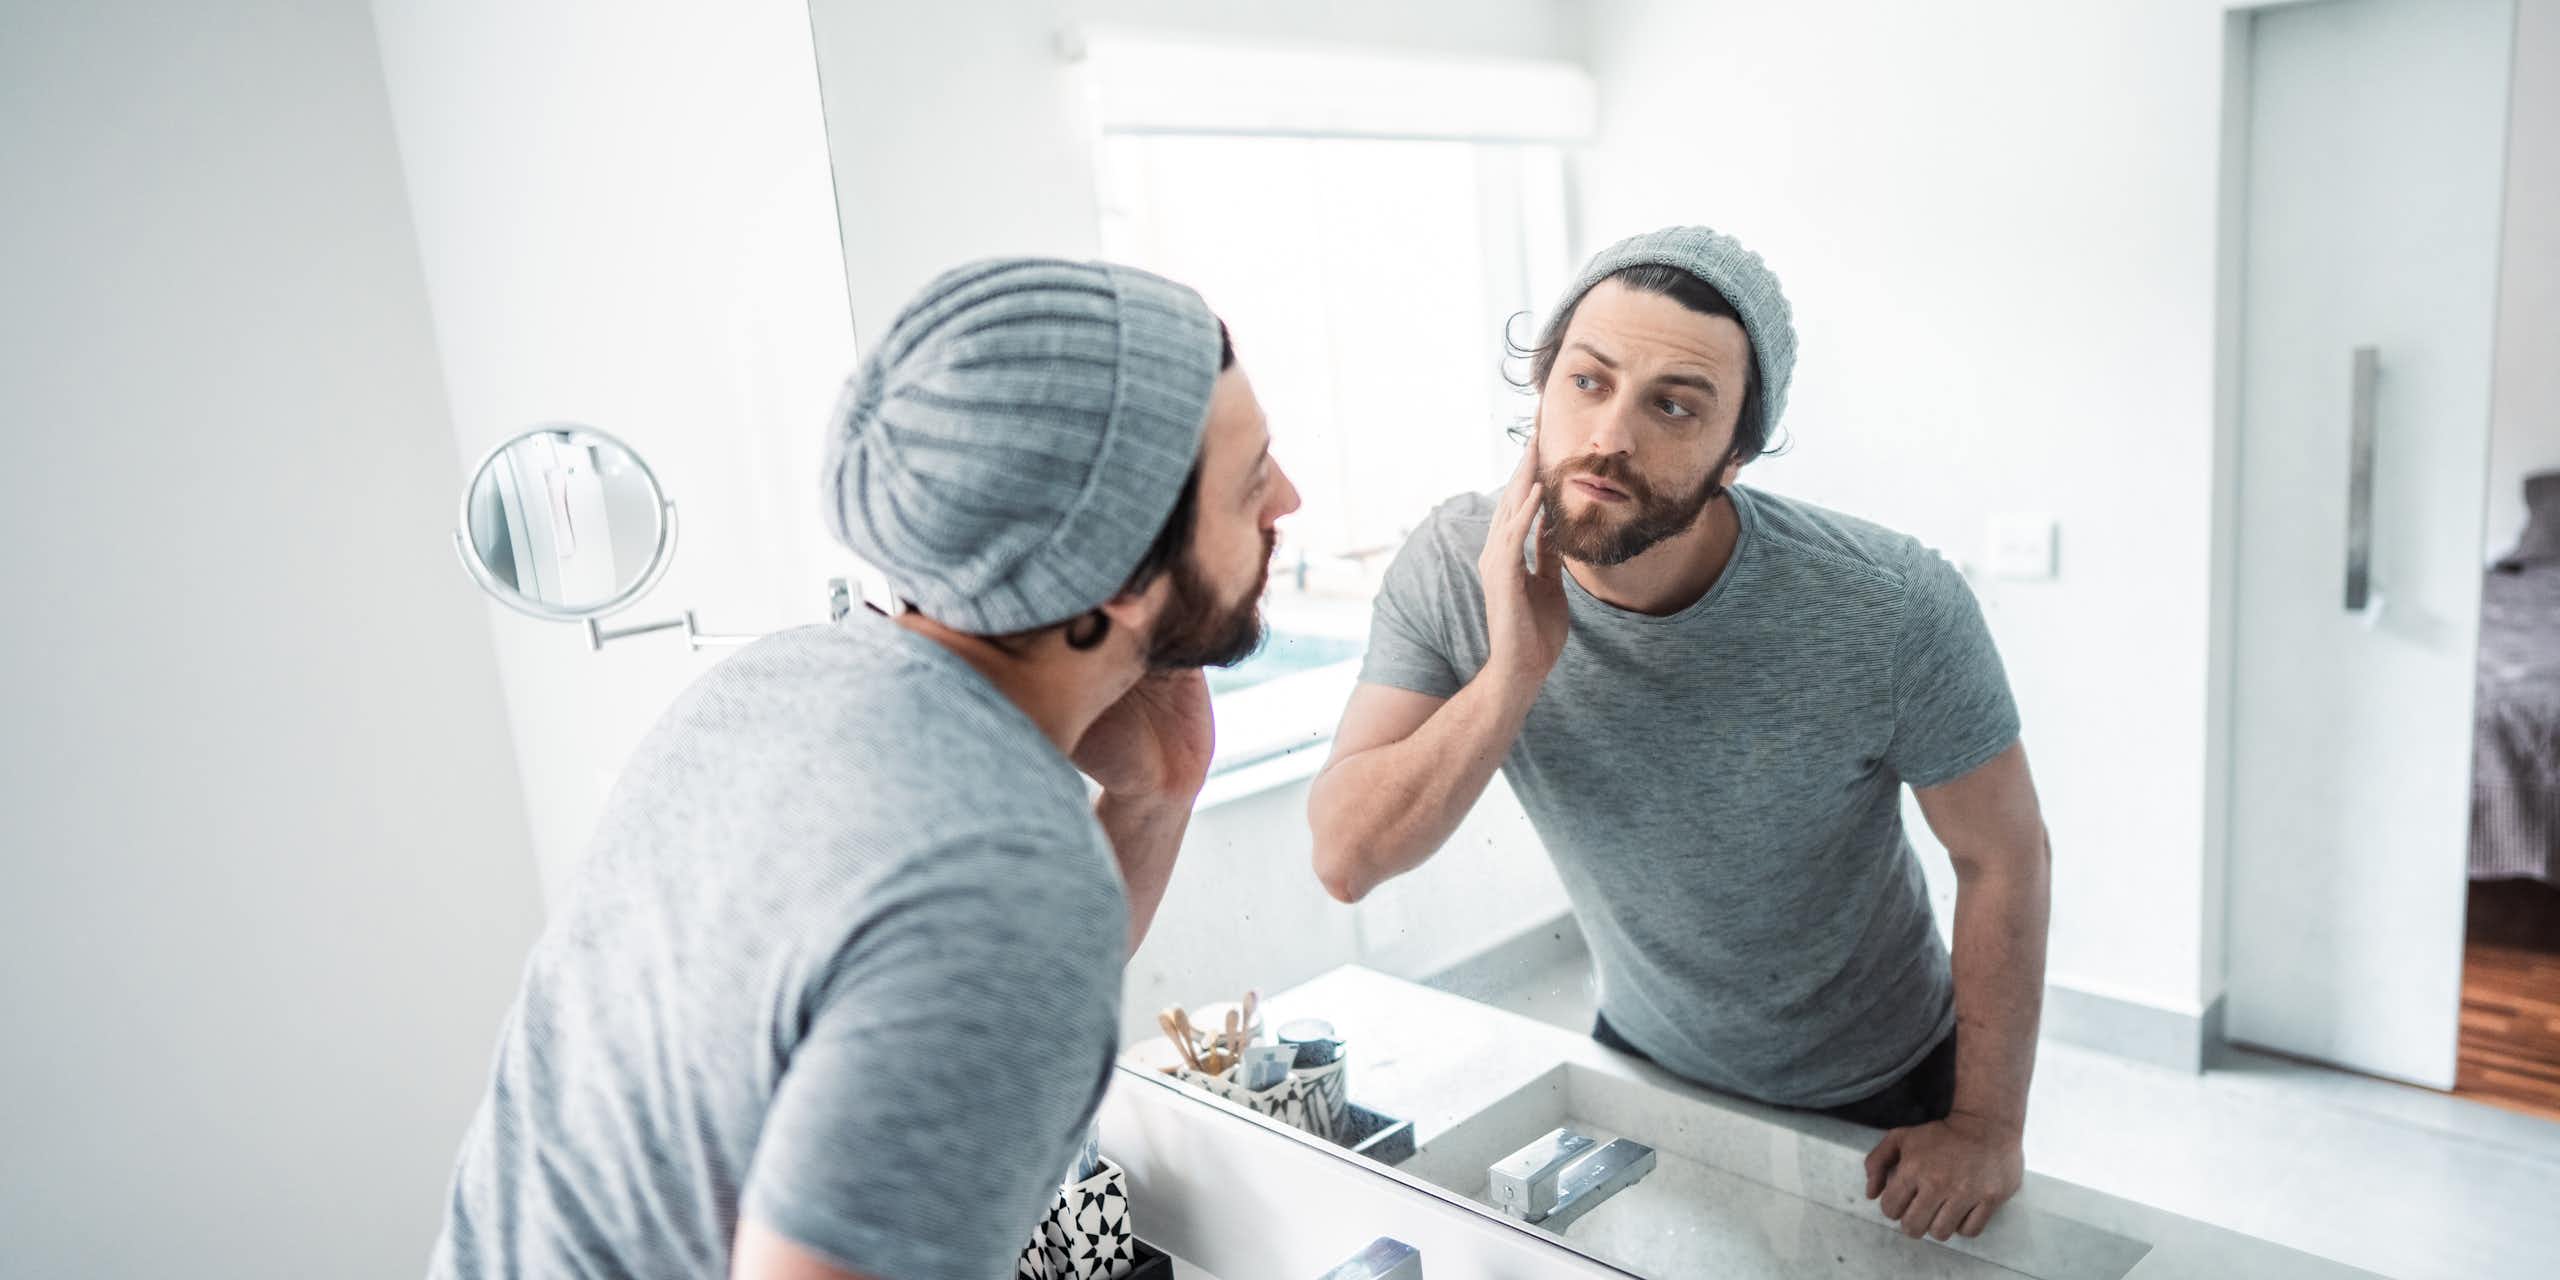 a young bearded man wearing a knit cap and t-shirt touches his face as he looks at himself in a bathroom mirror